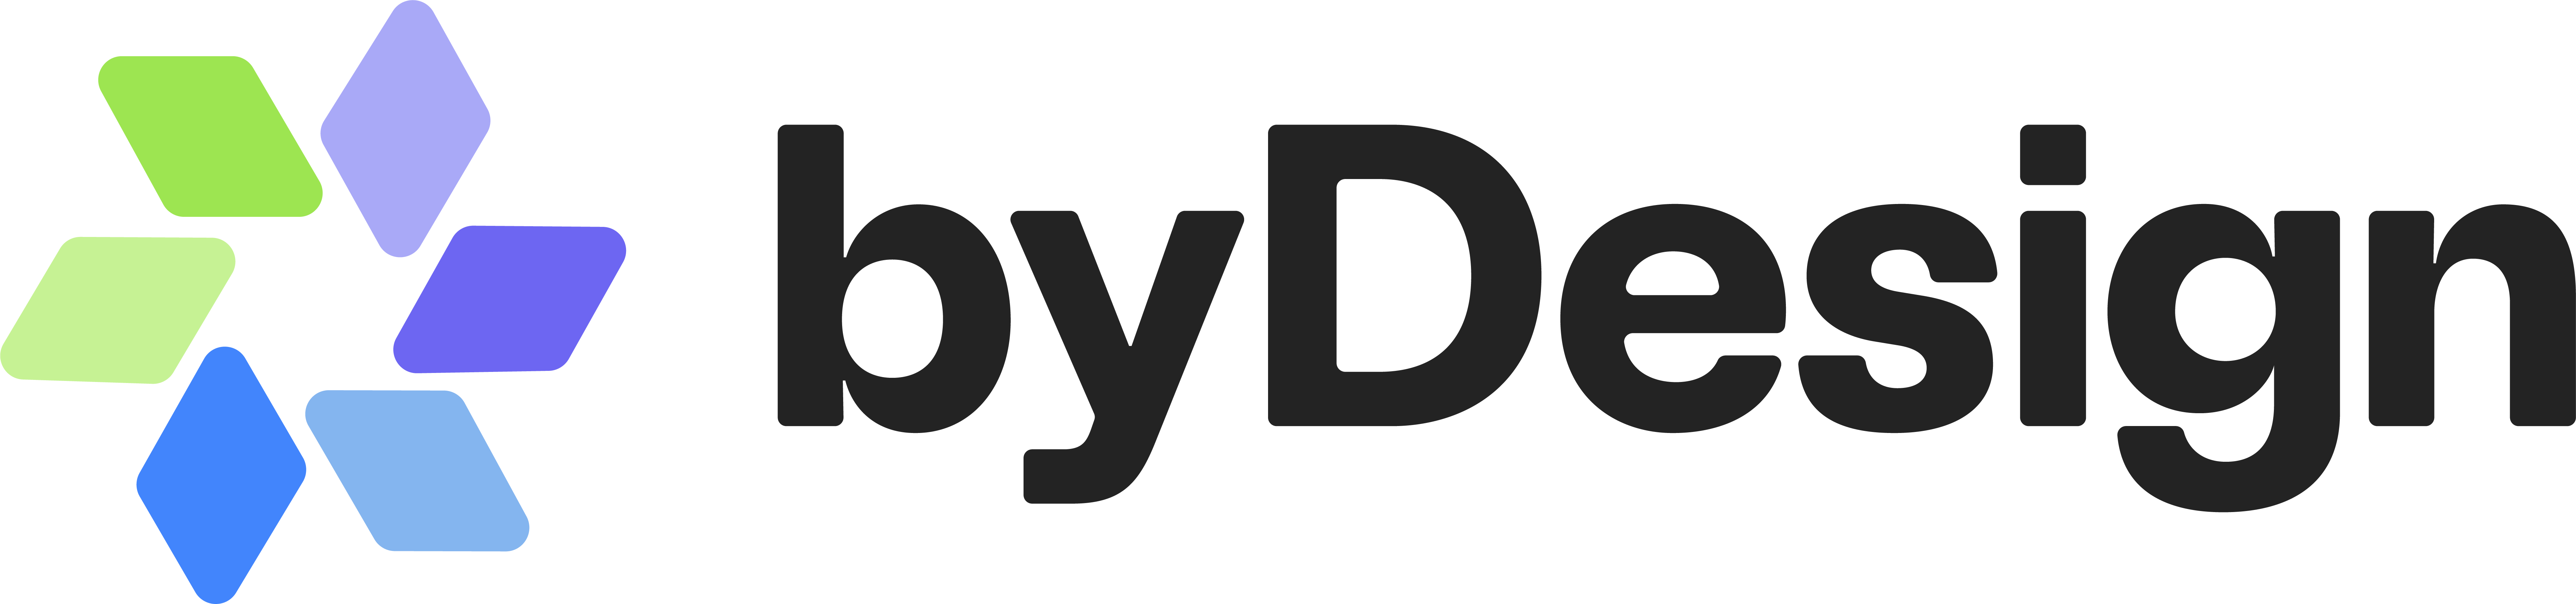 byDesign Launches Subscription Marketing Service to Keep Teams Agile